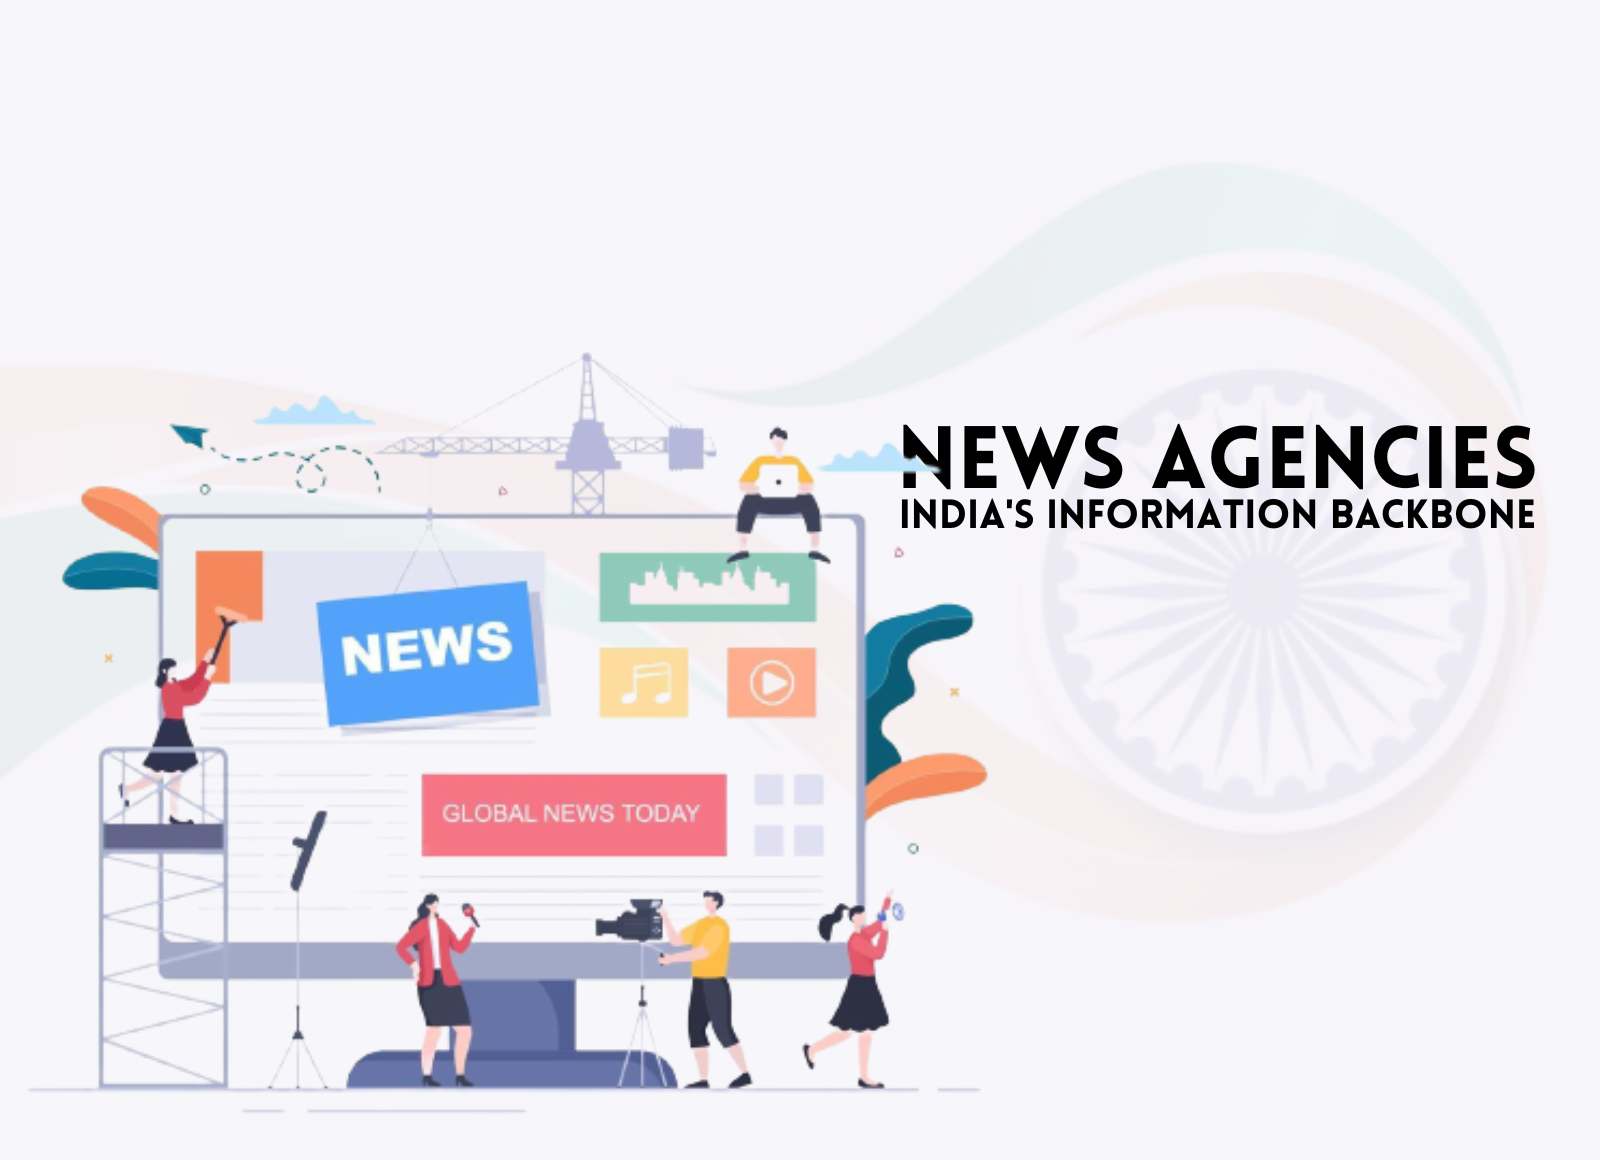 news agencies play a pivotal role in shaping public opinion and disseminating information to the masses.